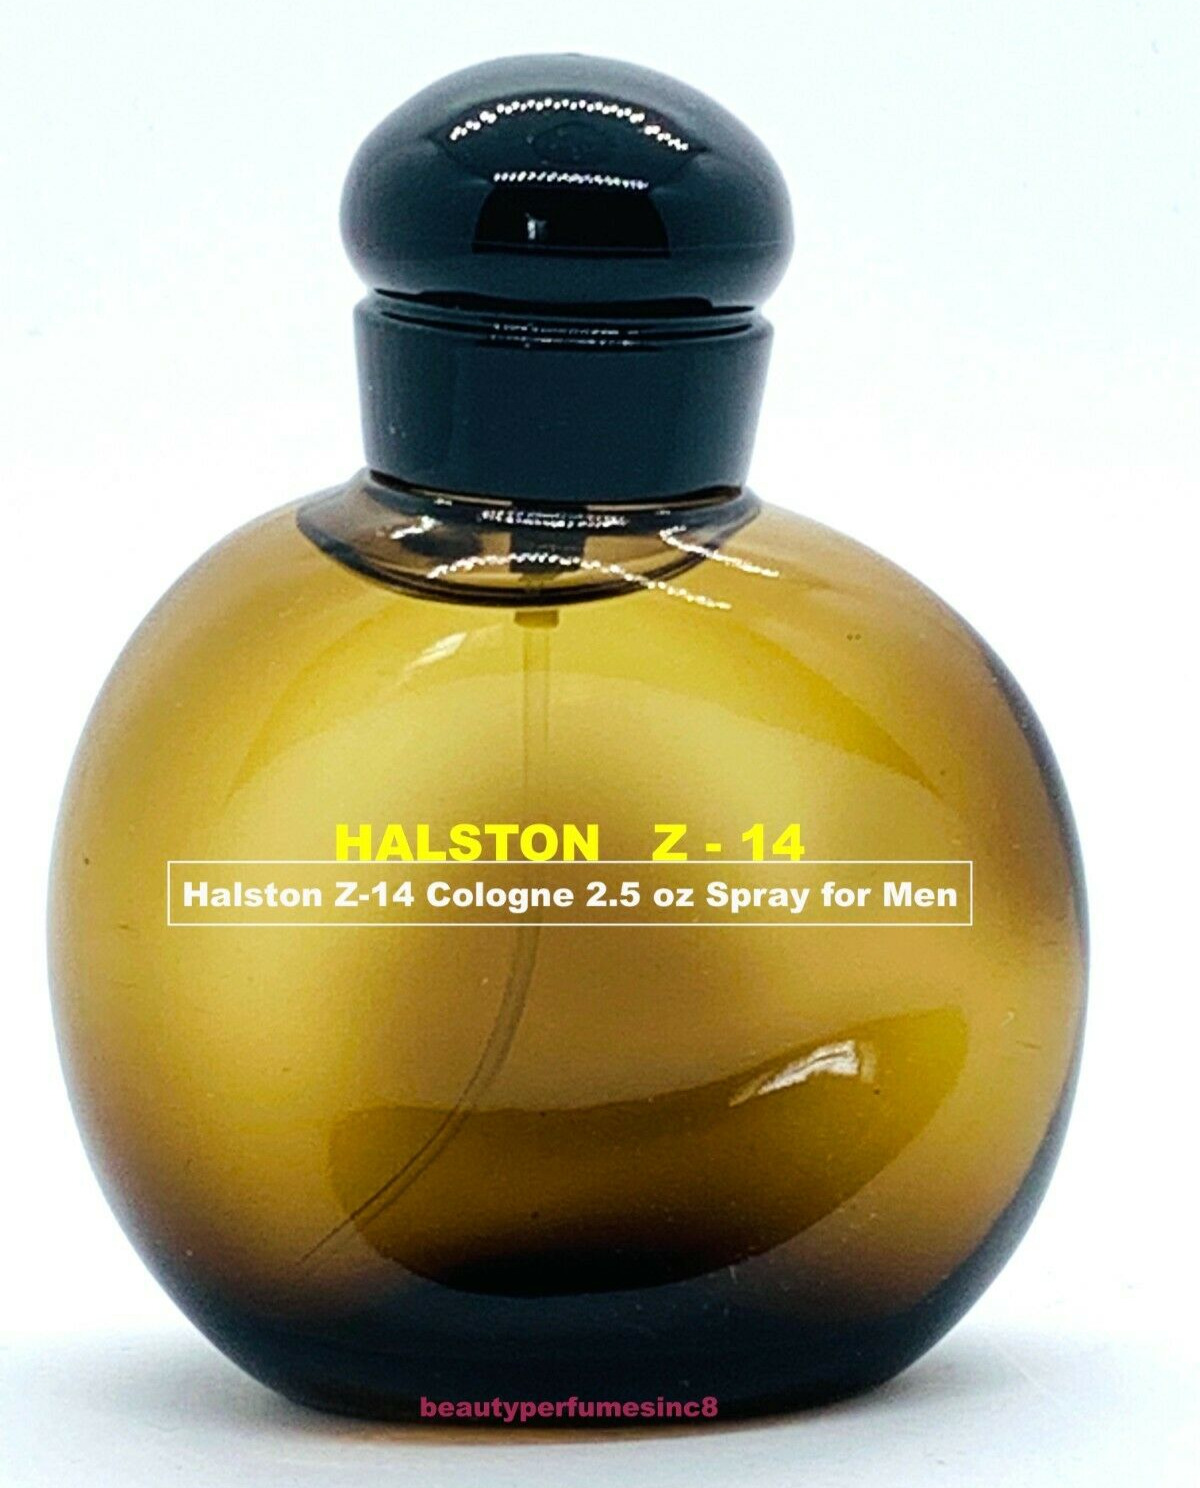 Halston Z 14 by Halston Cologne for Men 2.5 oz / 75 ml Spray, New without box